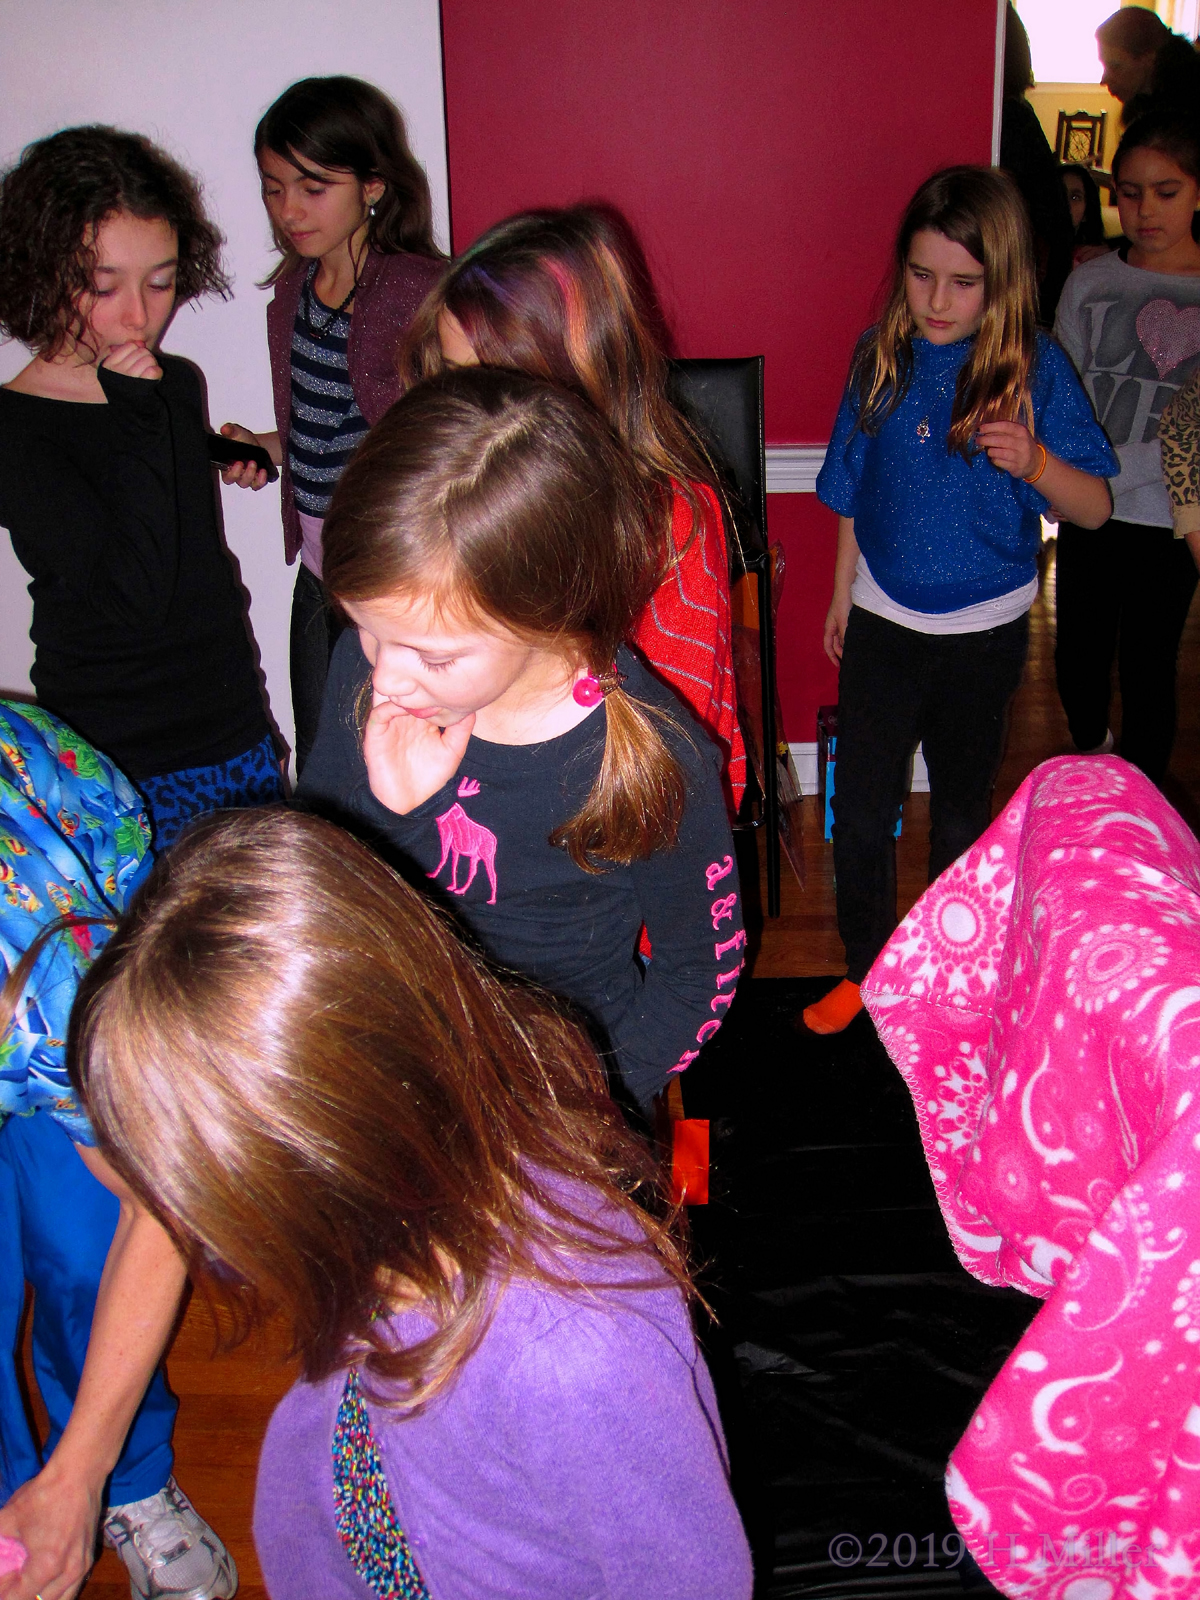 Fun Guests At The Cool Spa Party For Girls, Choosing Spa Robes